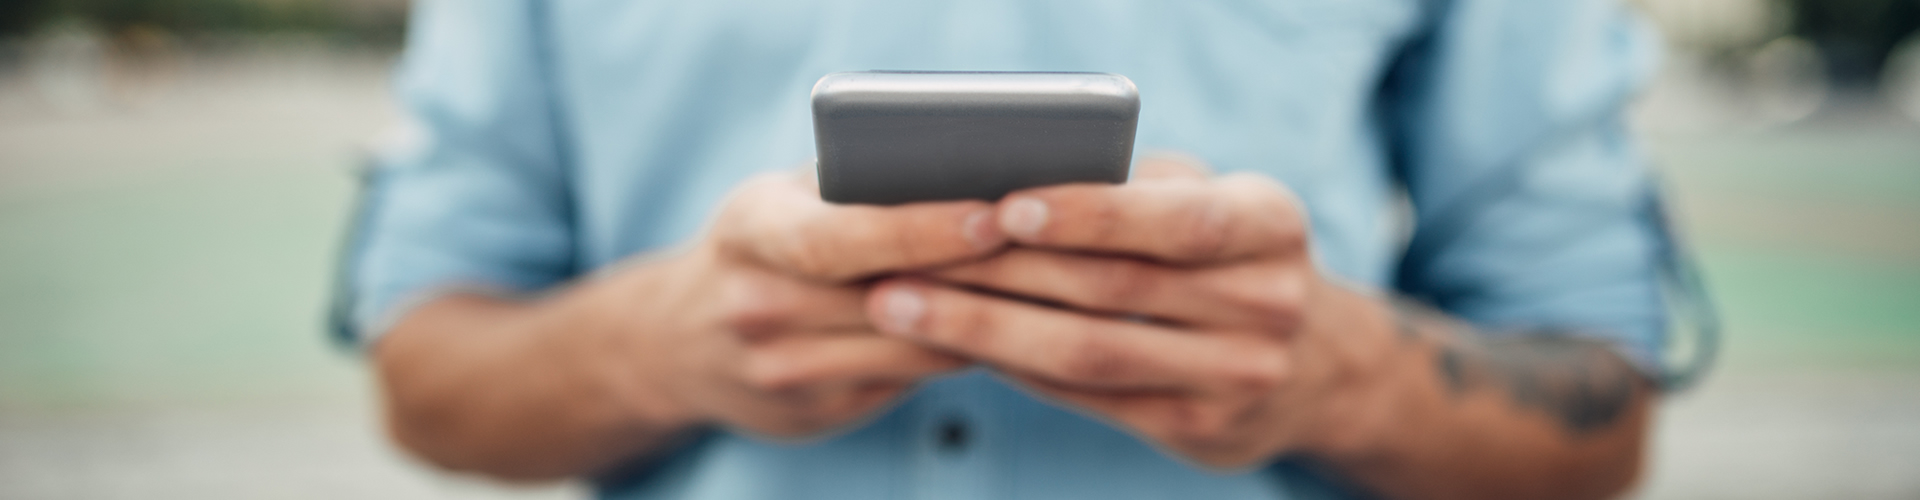 Online Banking Header: Person checking mobile device